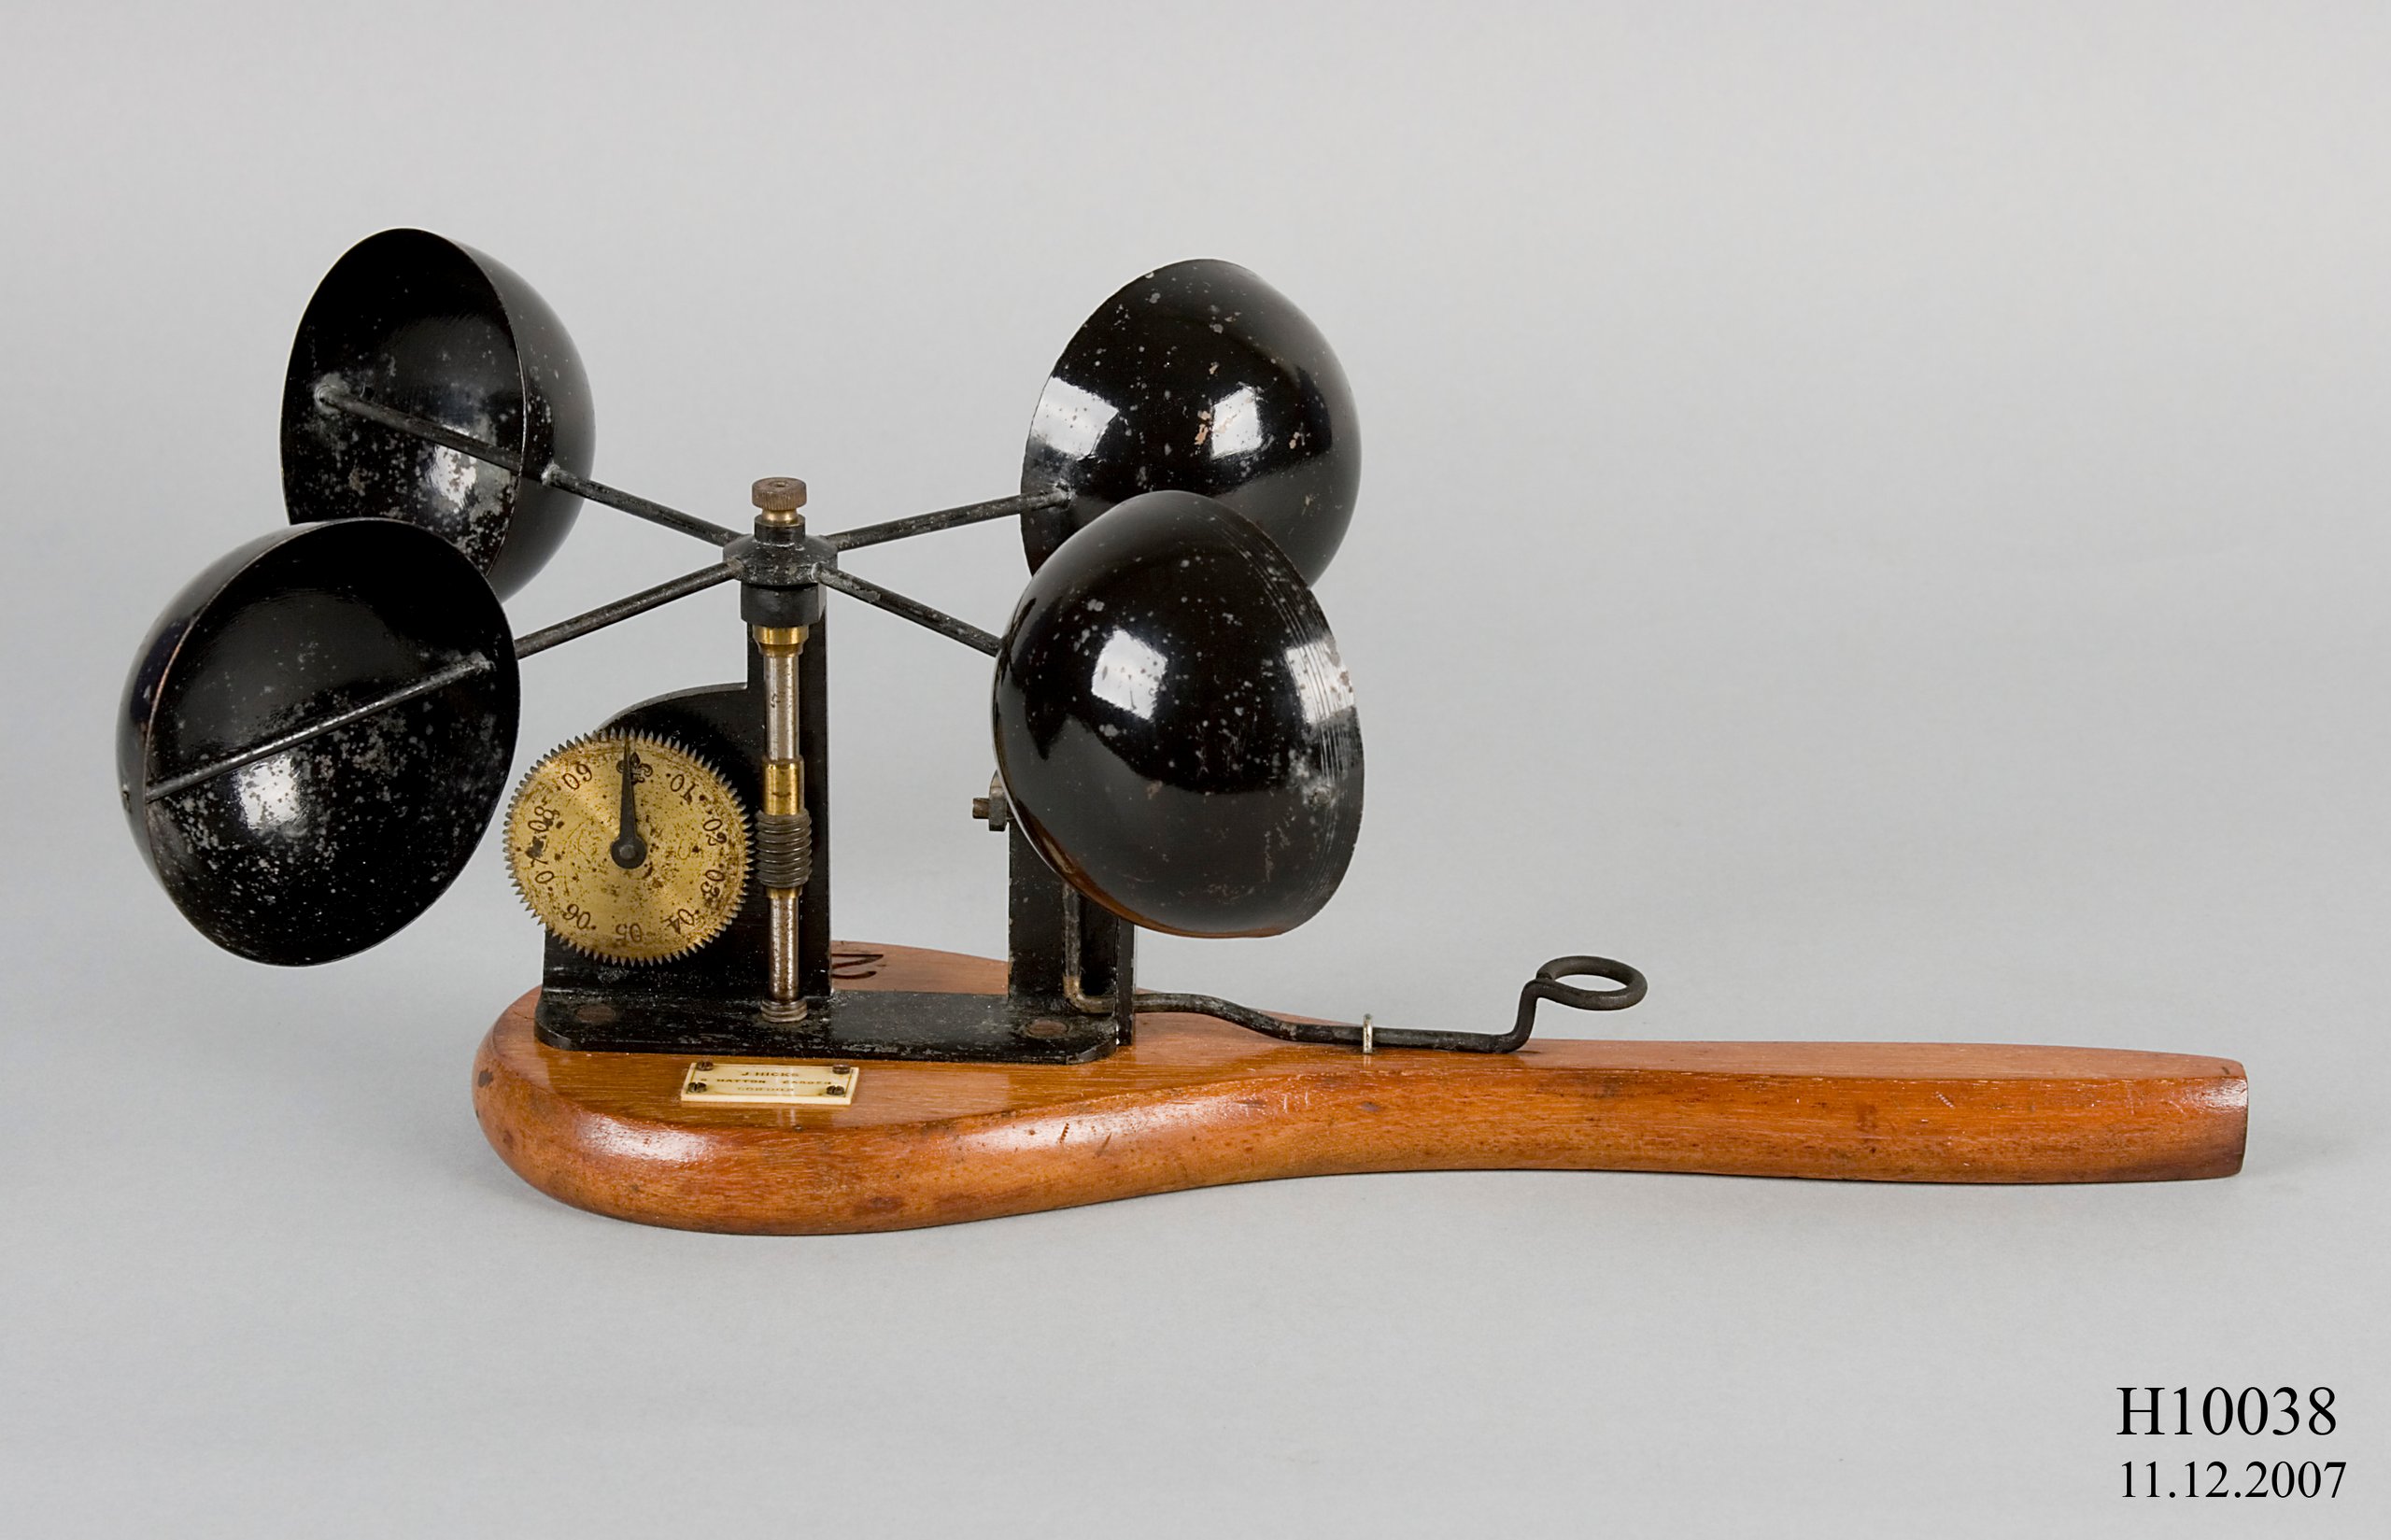 A hand held Robinson's anemometer